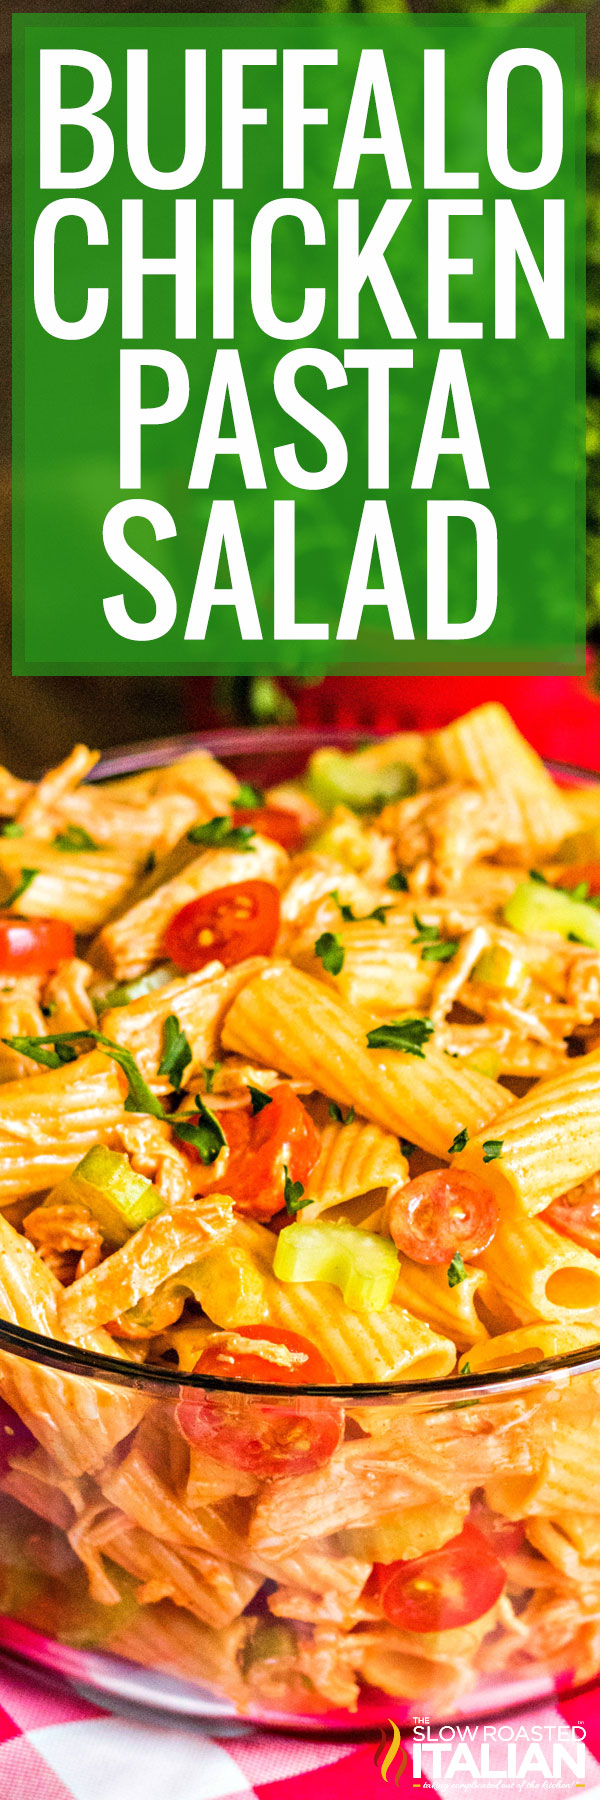 titled image (and shown): Buffalo Chicken Pasta Salad